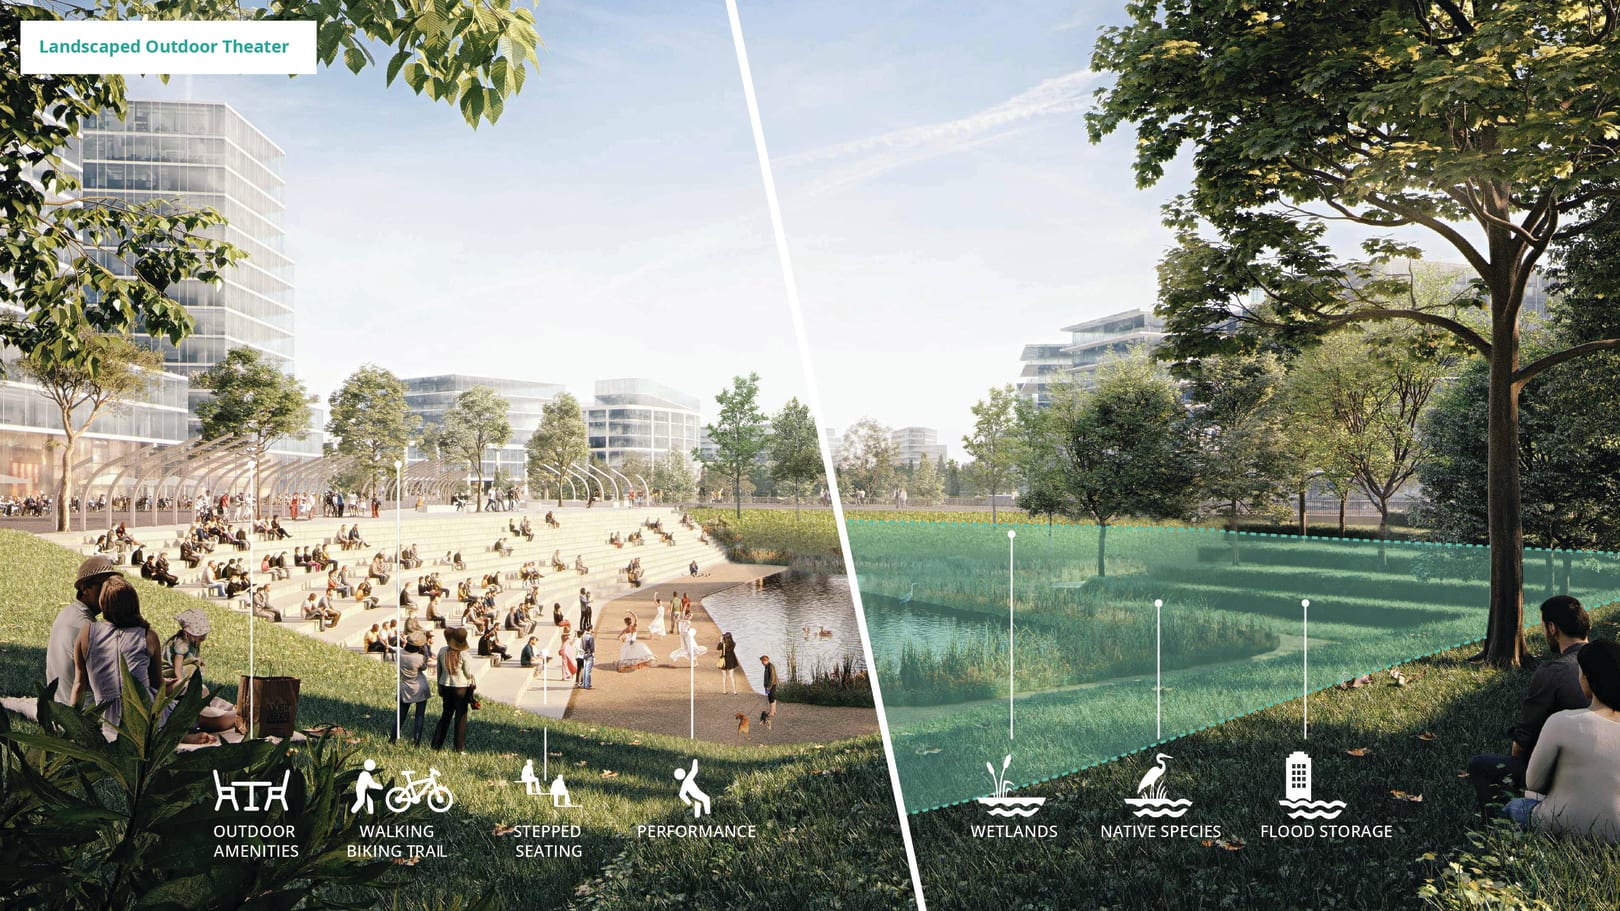 A rendering of the landscaped outdoor theatre. The image shows a sunny scene annotated with the features of the design. On the left are outdoor ammenities, walking and biking trails, stepped seating, and a performance plaza. The right displays a protection of the existing wetland ecology.